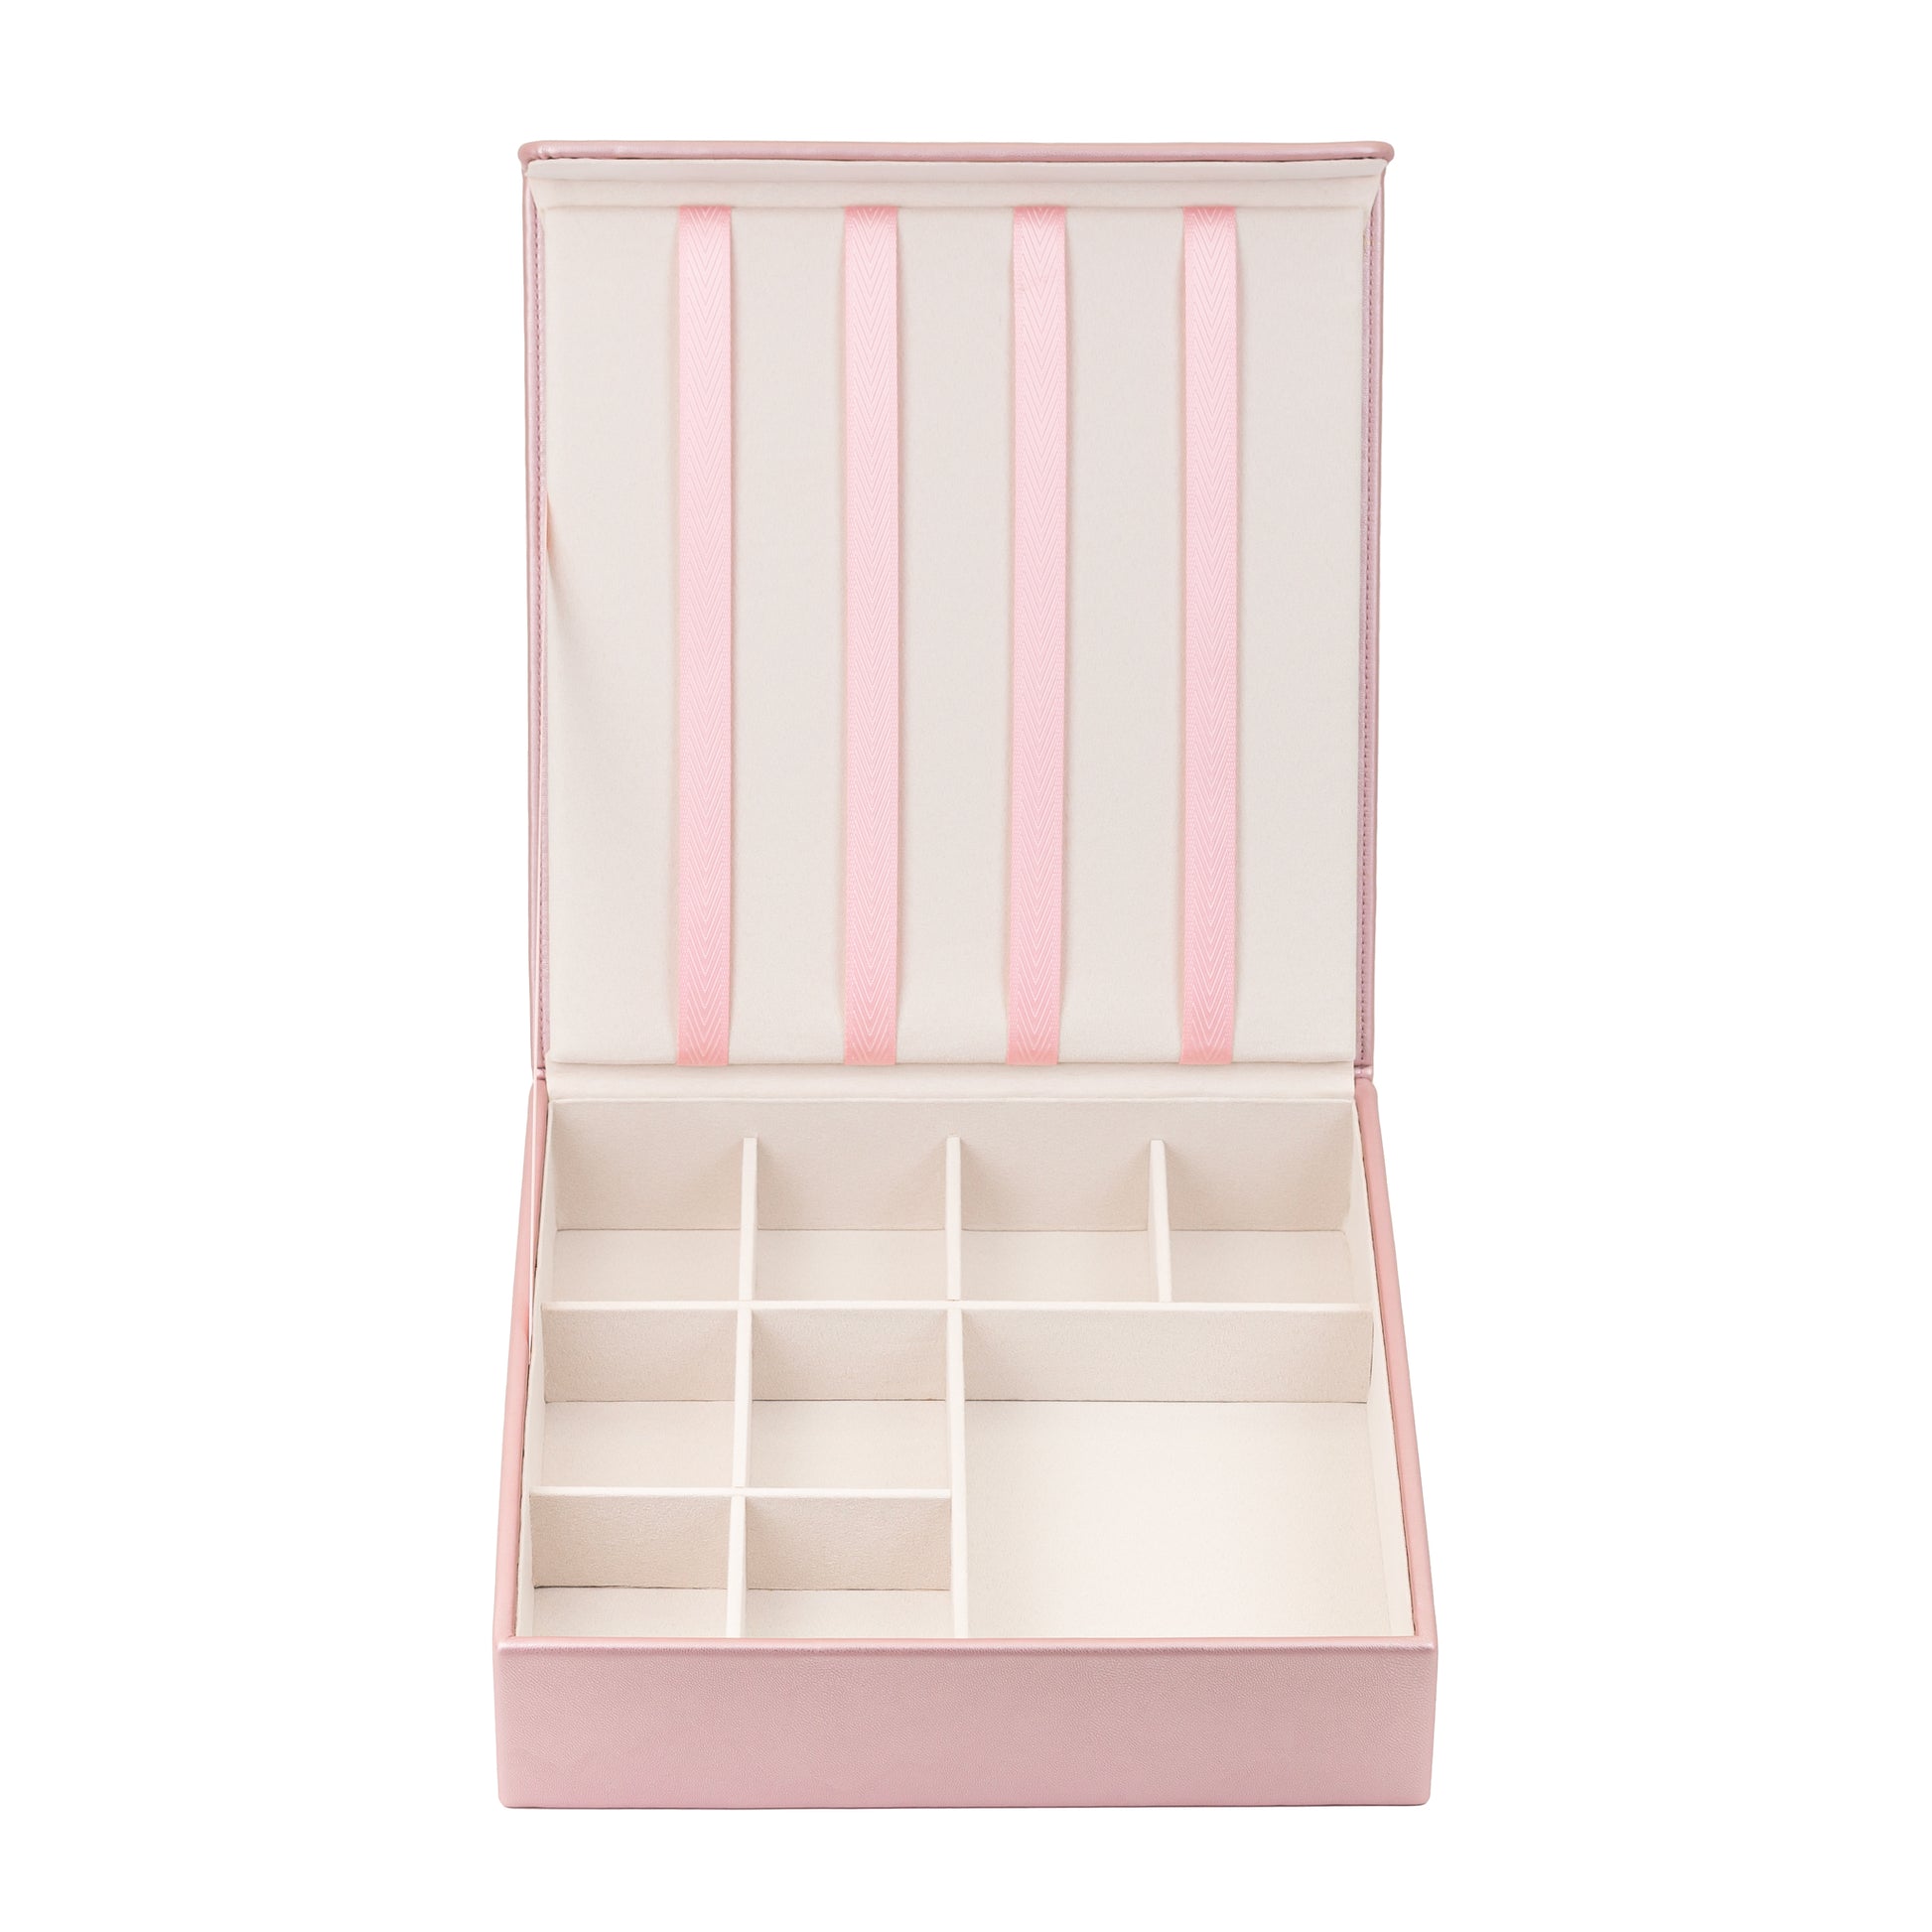 The pink hair accessory organiser is shown against a white background. The box is empty and clearly shows the 4 ribbons attached to the lid which are designed to hold hair clips, and the grid in the bottom half which is designed to store hair bands, barrettes, hair bobbles and scrunchies